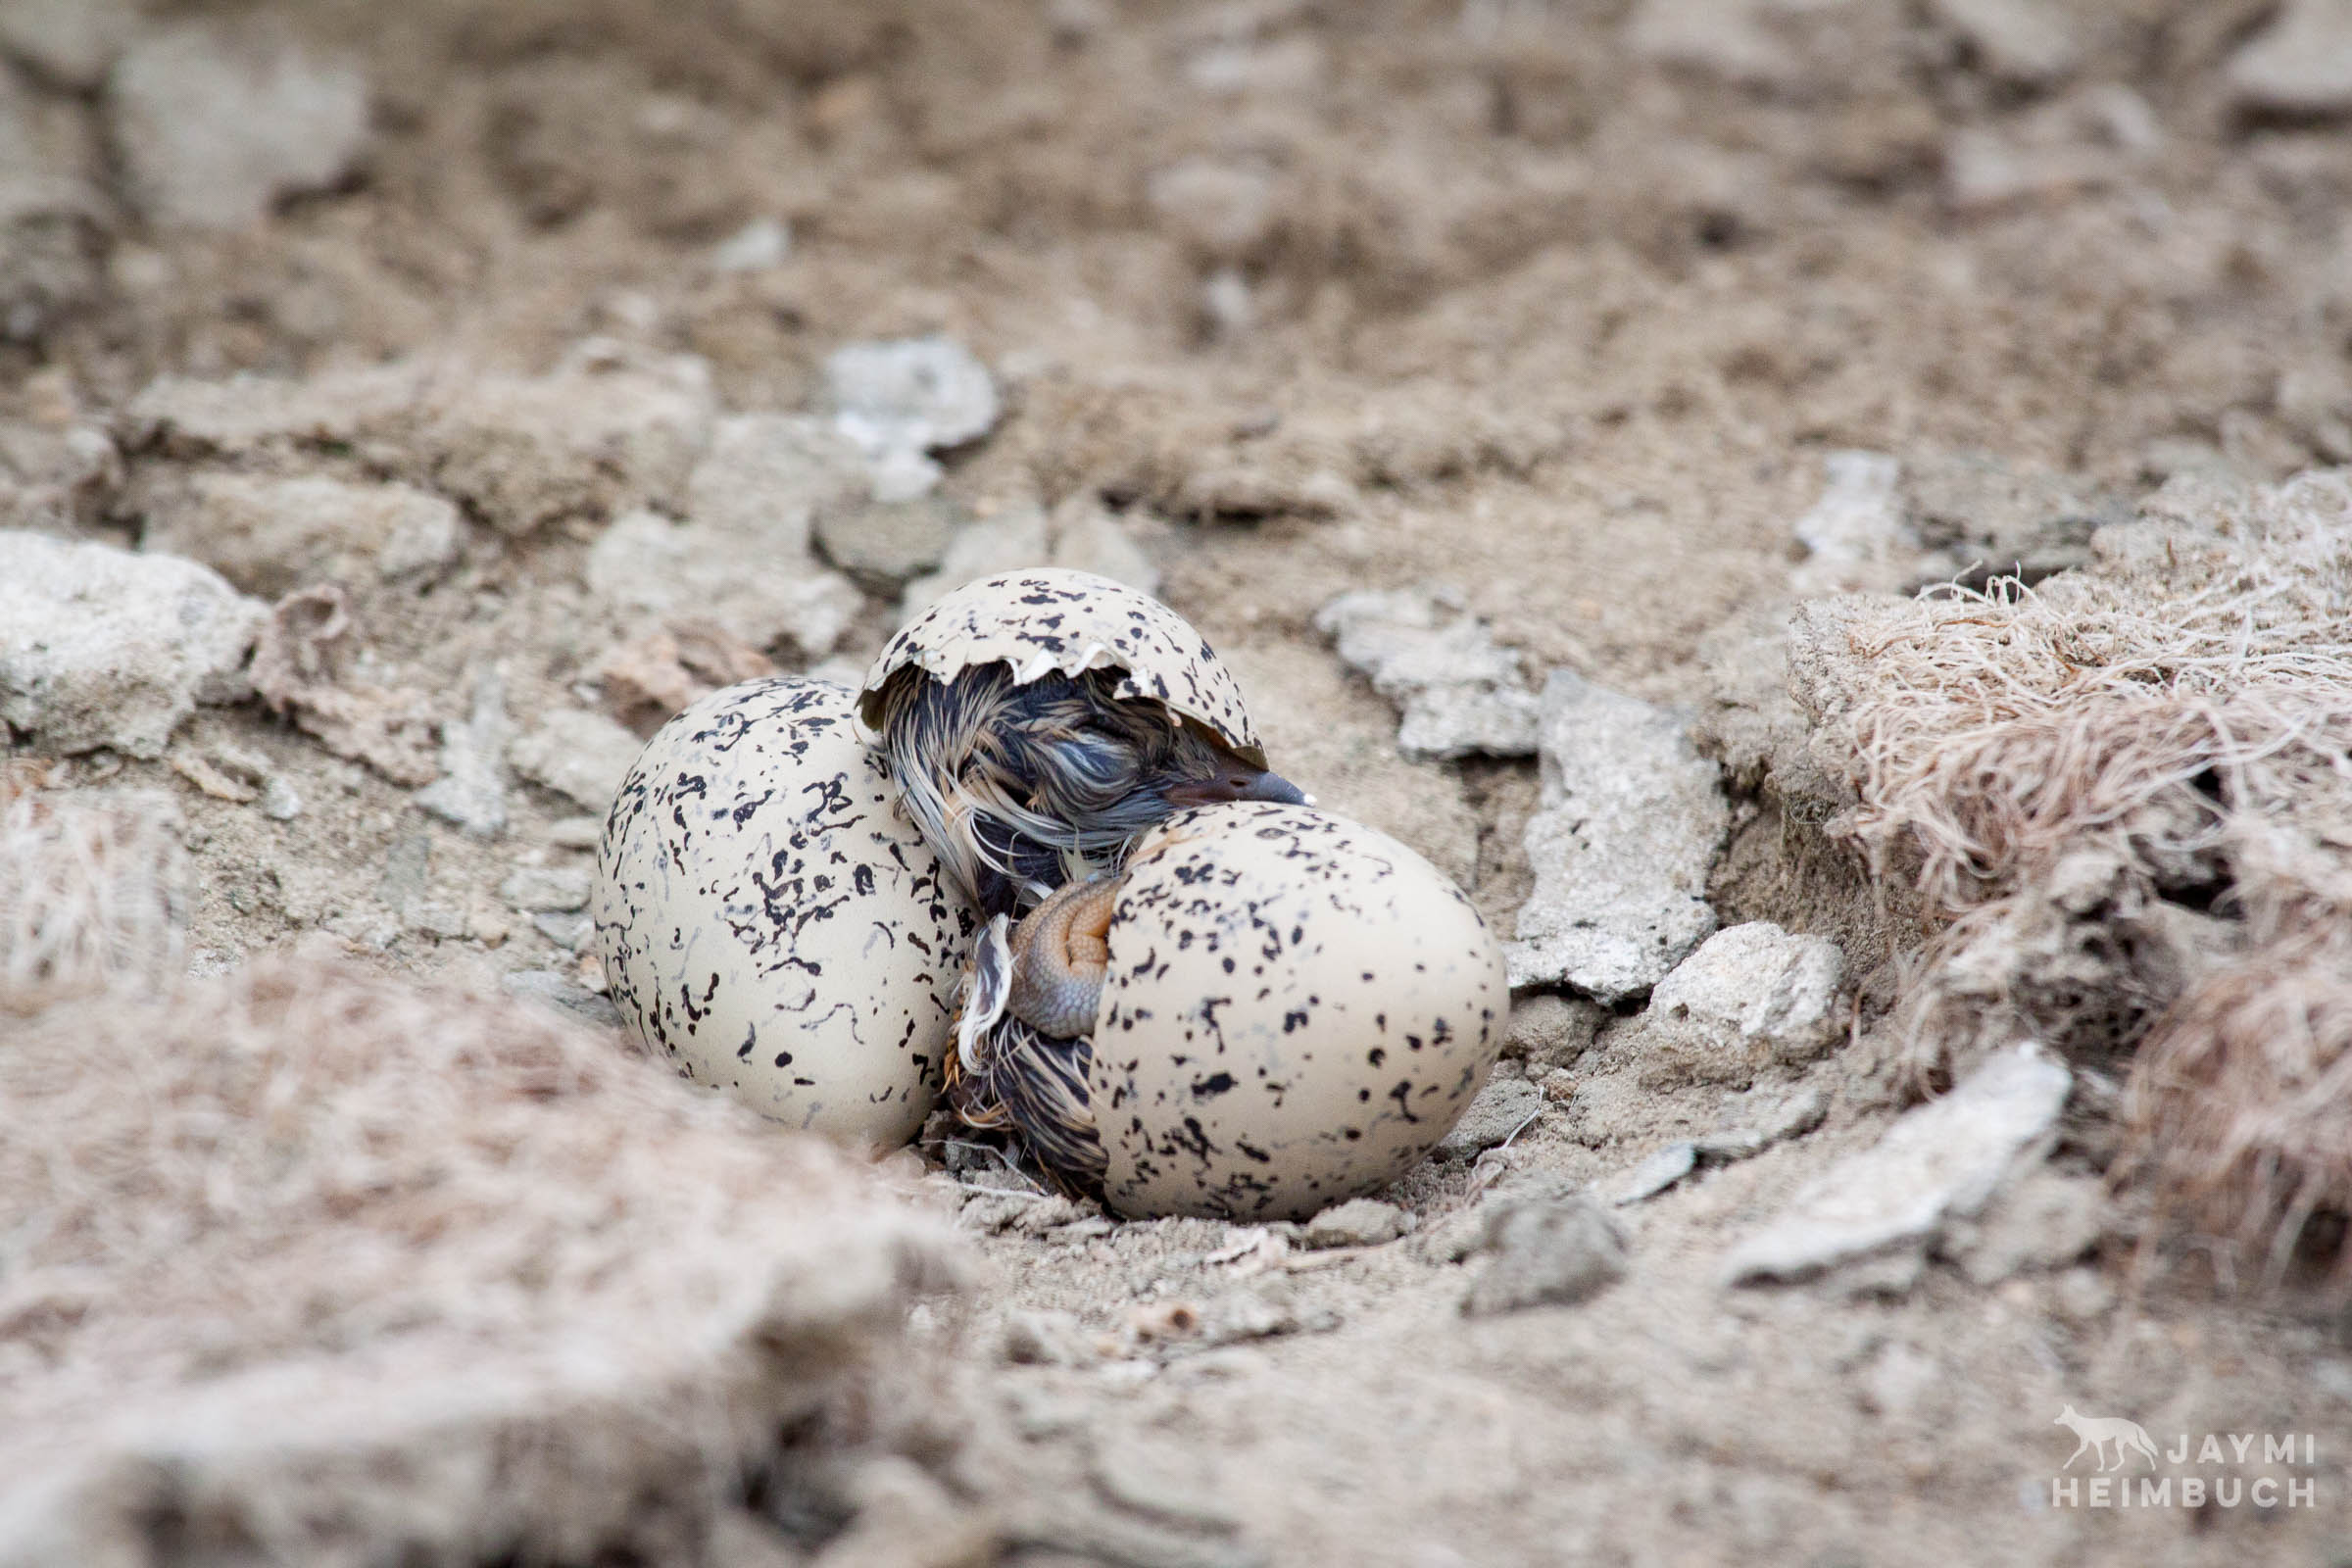 Western snowy plover chick just hatched